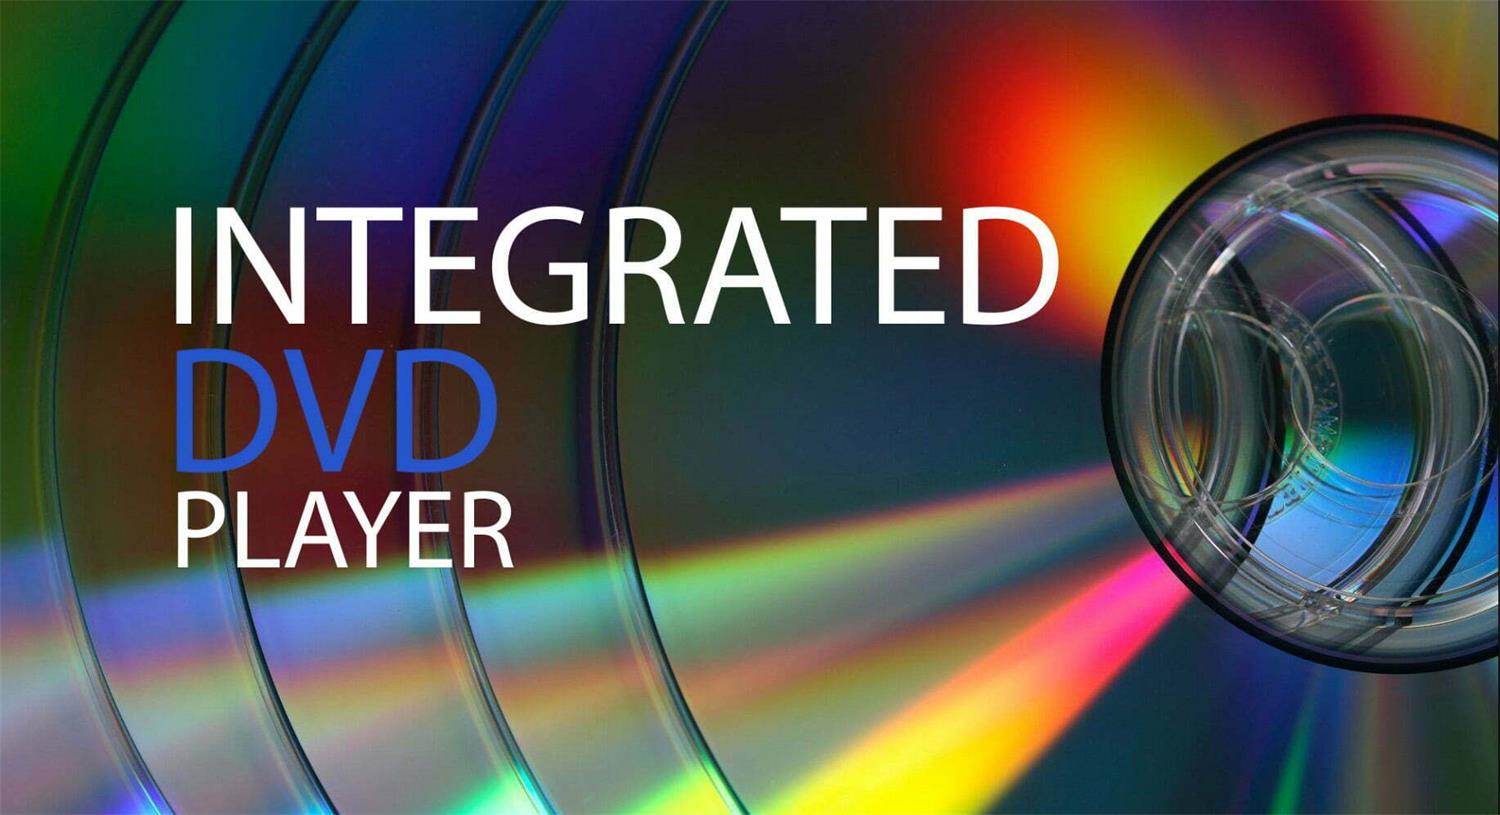 Integrated DVD / CD player